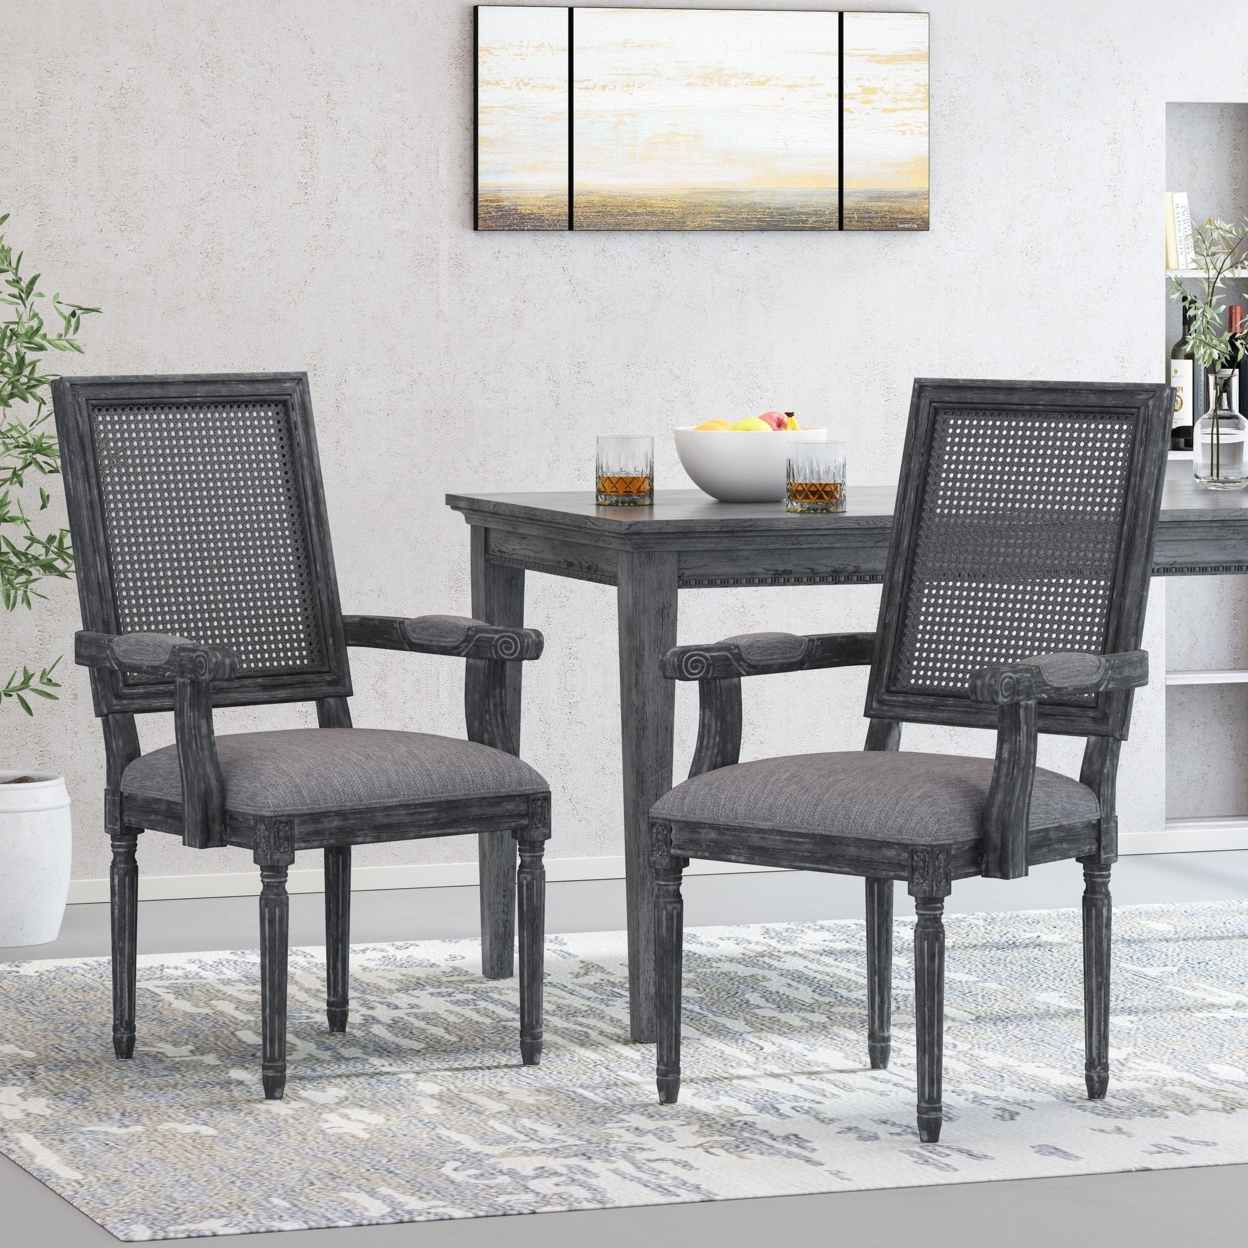 Zentner French Country Wood And Cane Upholstered Dining Chair - Gray/grey, Set Of 4